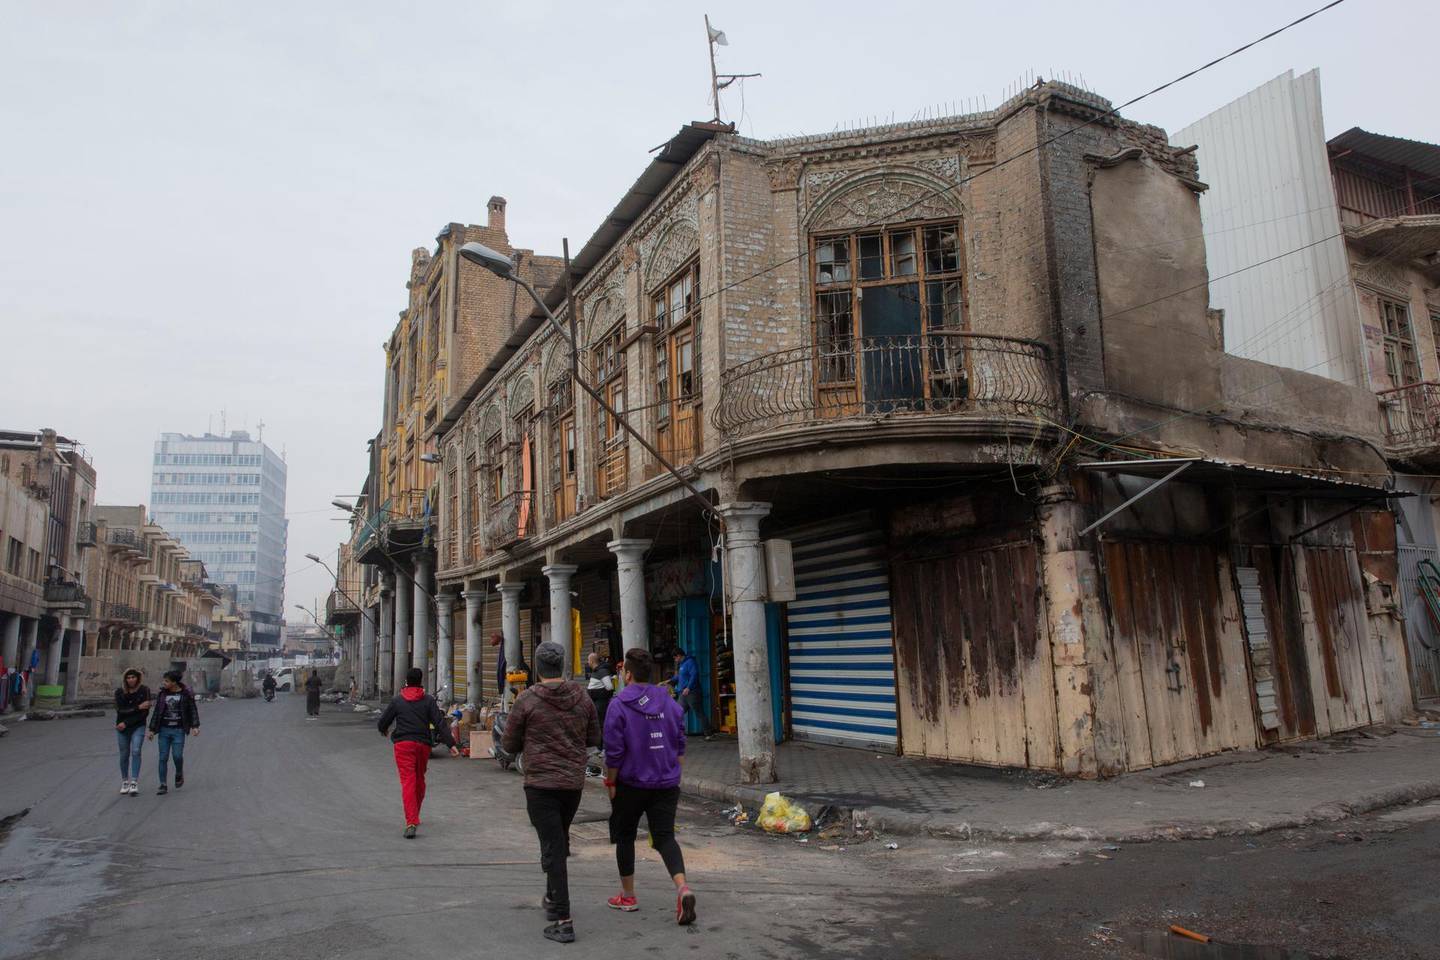 In this Monday, Dec. 16, 2019 photo, with the major part of the shops are closed, cement blocks close the commercial and historic al-Rasheed street, in the center of Baghdad, Iraq.  With Iraq's leaderless uprising now in its third month, the protracted street hostilities, internet outages, blocked roads and a general atmosphere of unease are posing risks to Iraq's economy. In particular, the unrest has set back the most fragile segment of the country's economy, the private sector, where business owners have faced losses from damage to merchandise and disruptions of markets and from consumers reeling in their spending out of fear for the future. (AP Photo/Nasser Nasser)